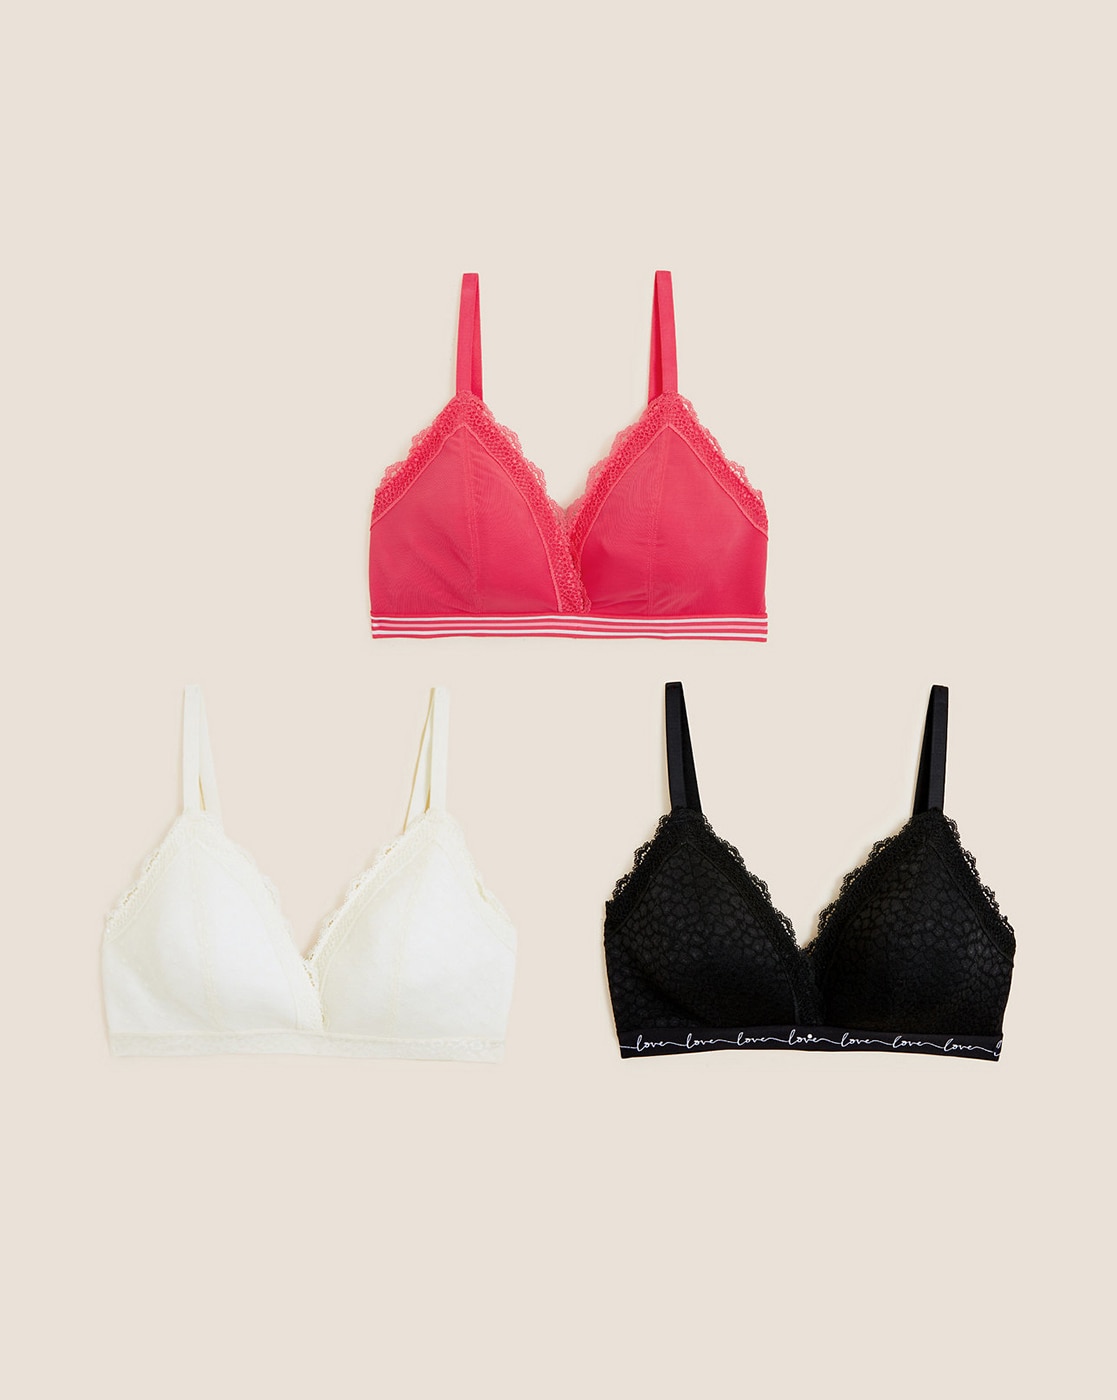 Non Wired Lace Trim First Bra 2 Pack, Lingerie